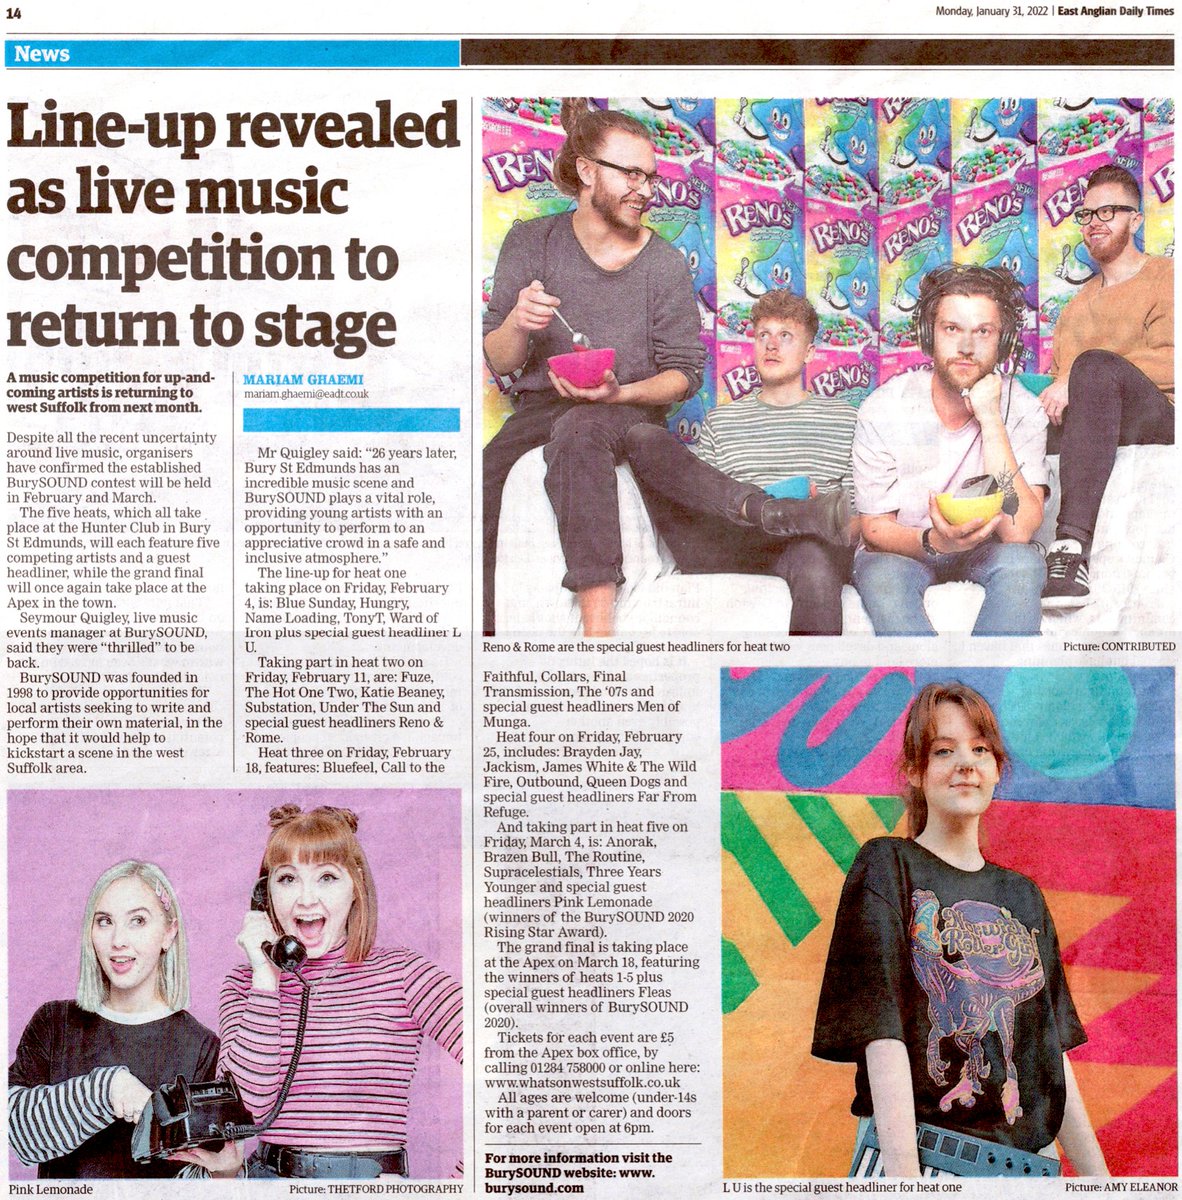 Huge thanks to @mariamghaemi at @EADT24 for this lovely preview of BurySOUND, with pics of guest headliners @renoandrome @PinkLemonadeHQ #LU Heat One is THIS FRIDAY, 4th Feb at @HunterClubBSE - grab your tickets via @WhatsOnWSuffolk at whatsonwestsuffolk.co.uk